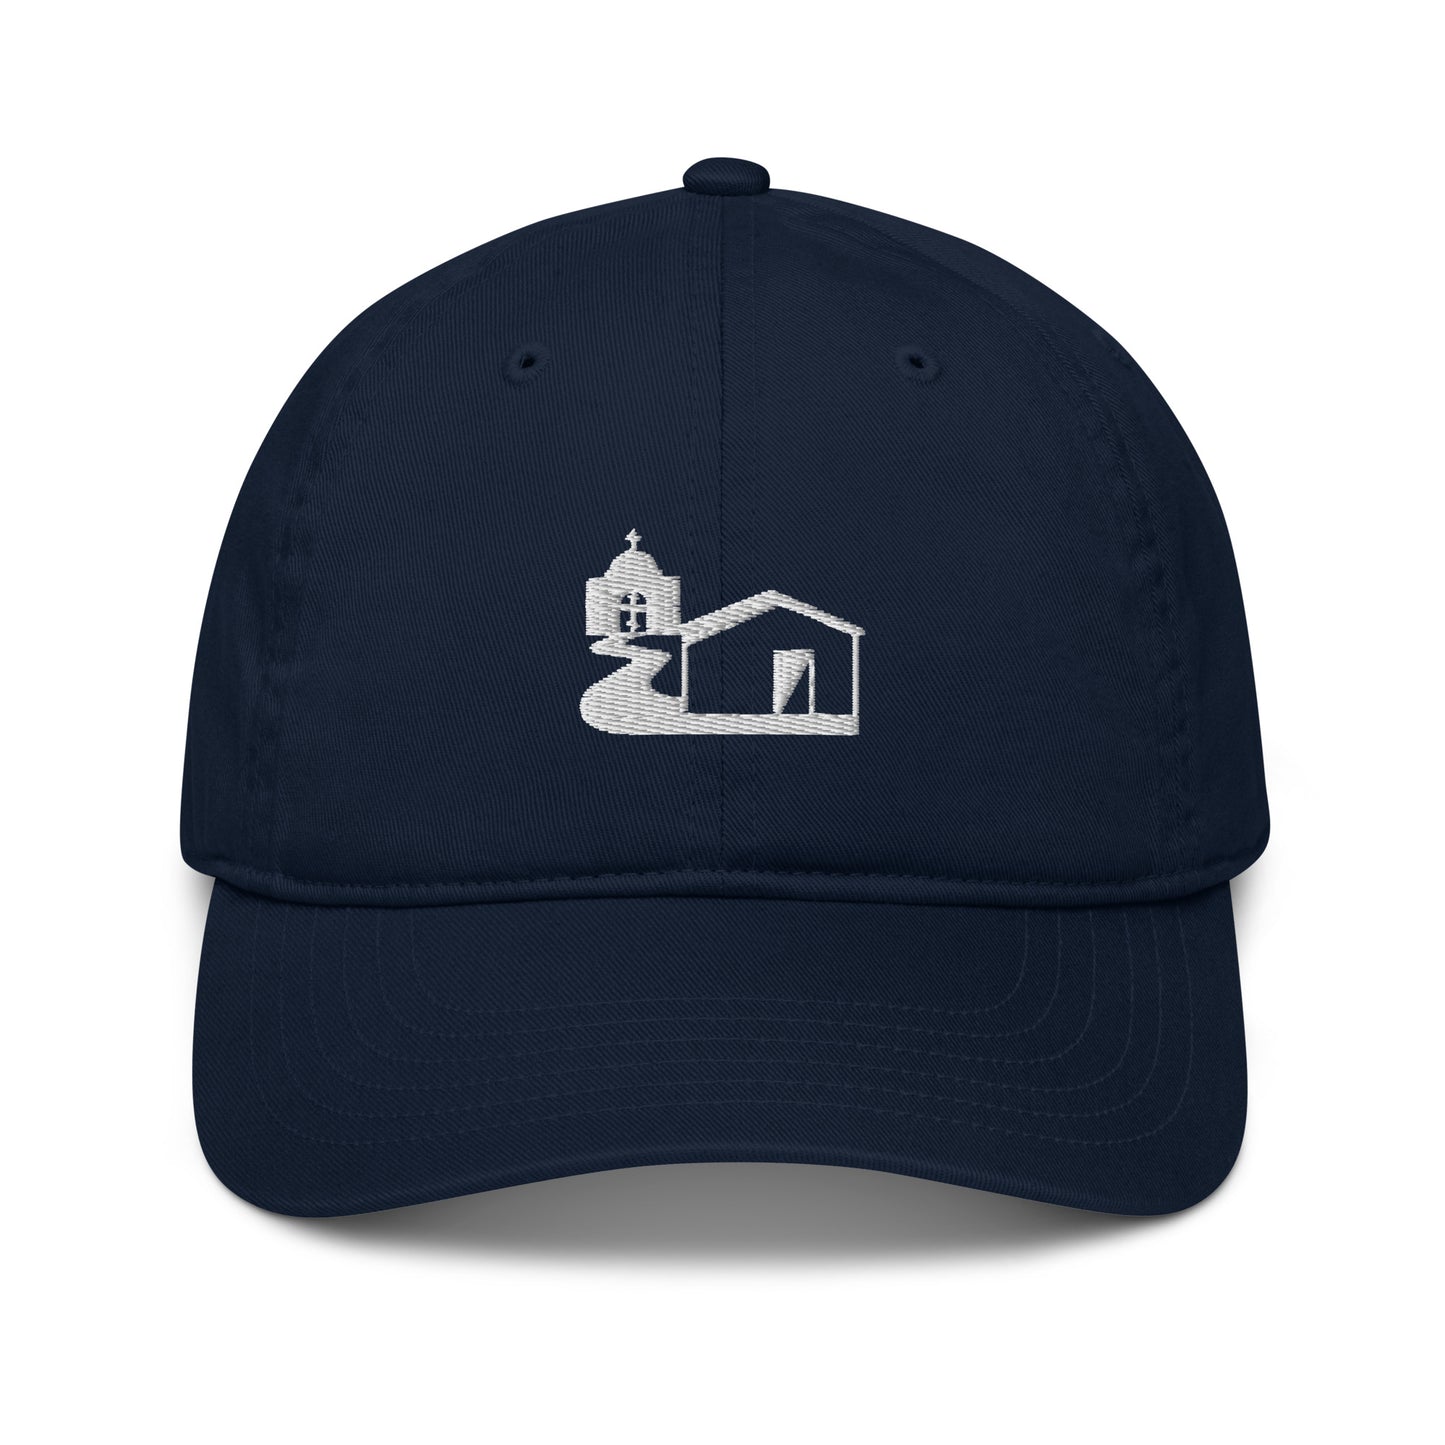 Project Mexico Organic dad hat